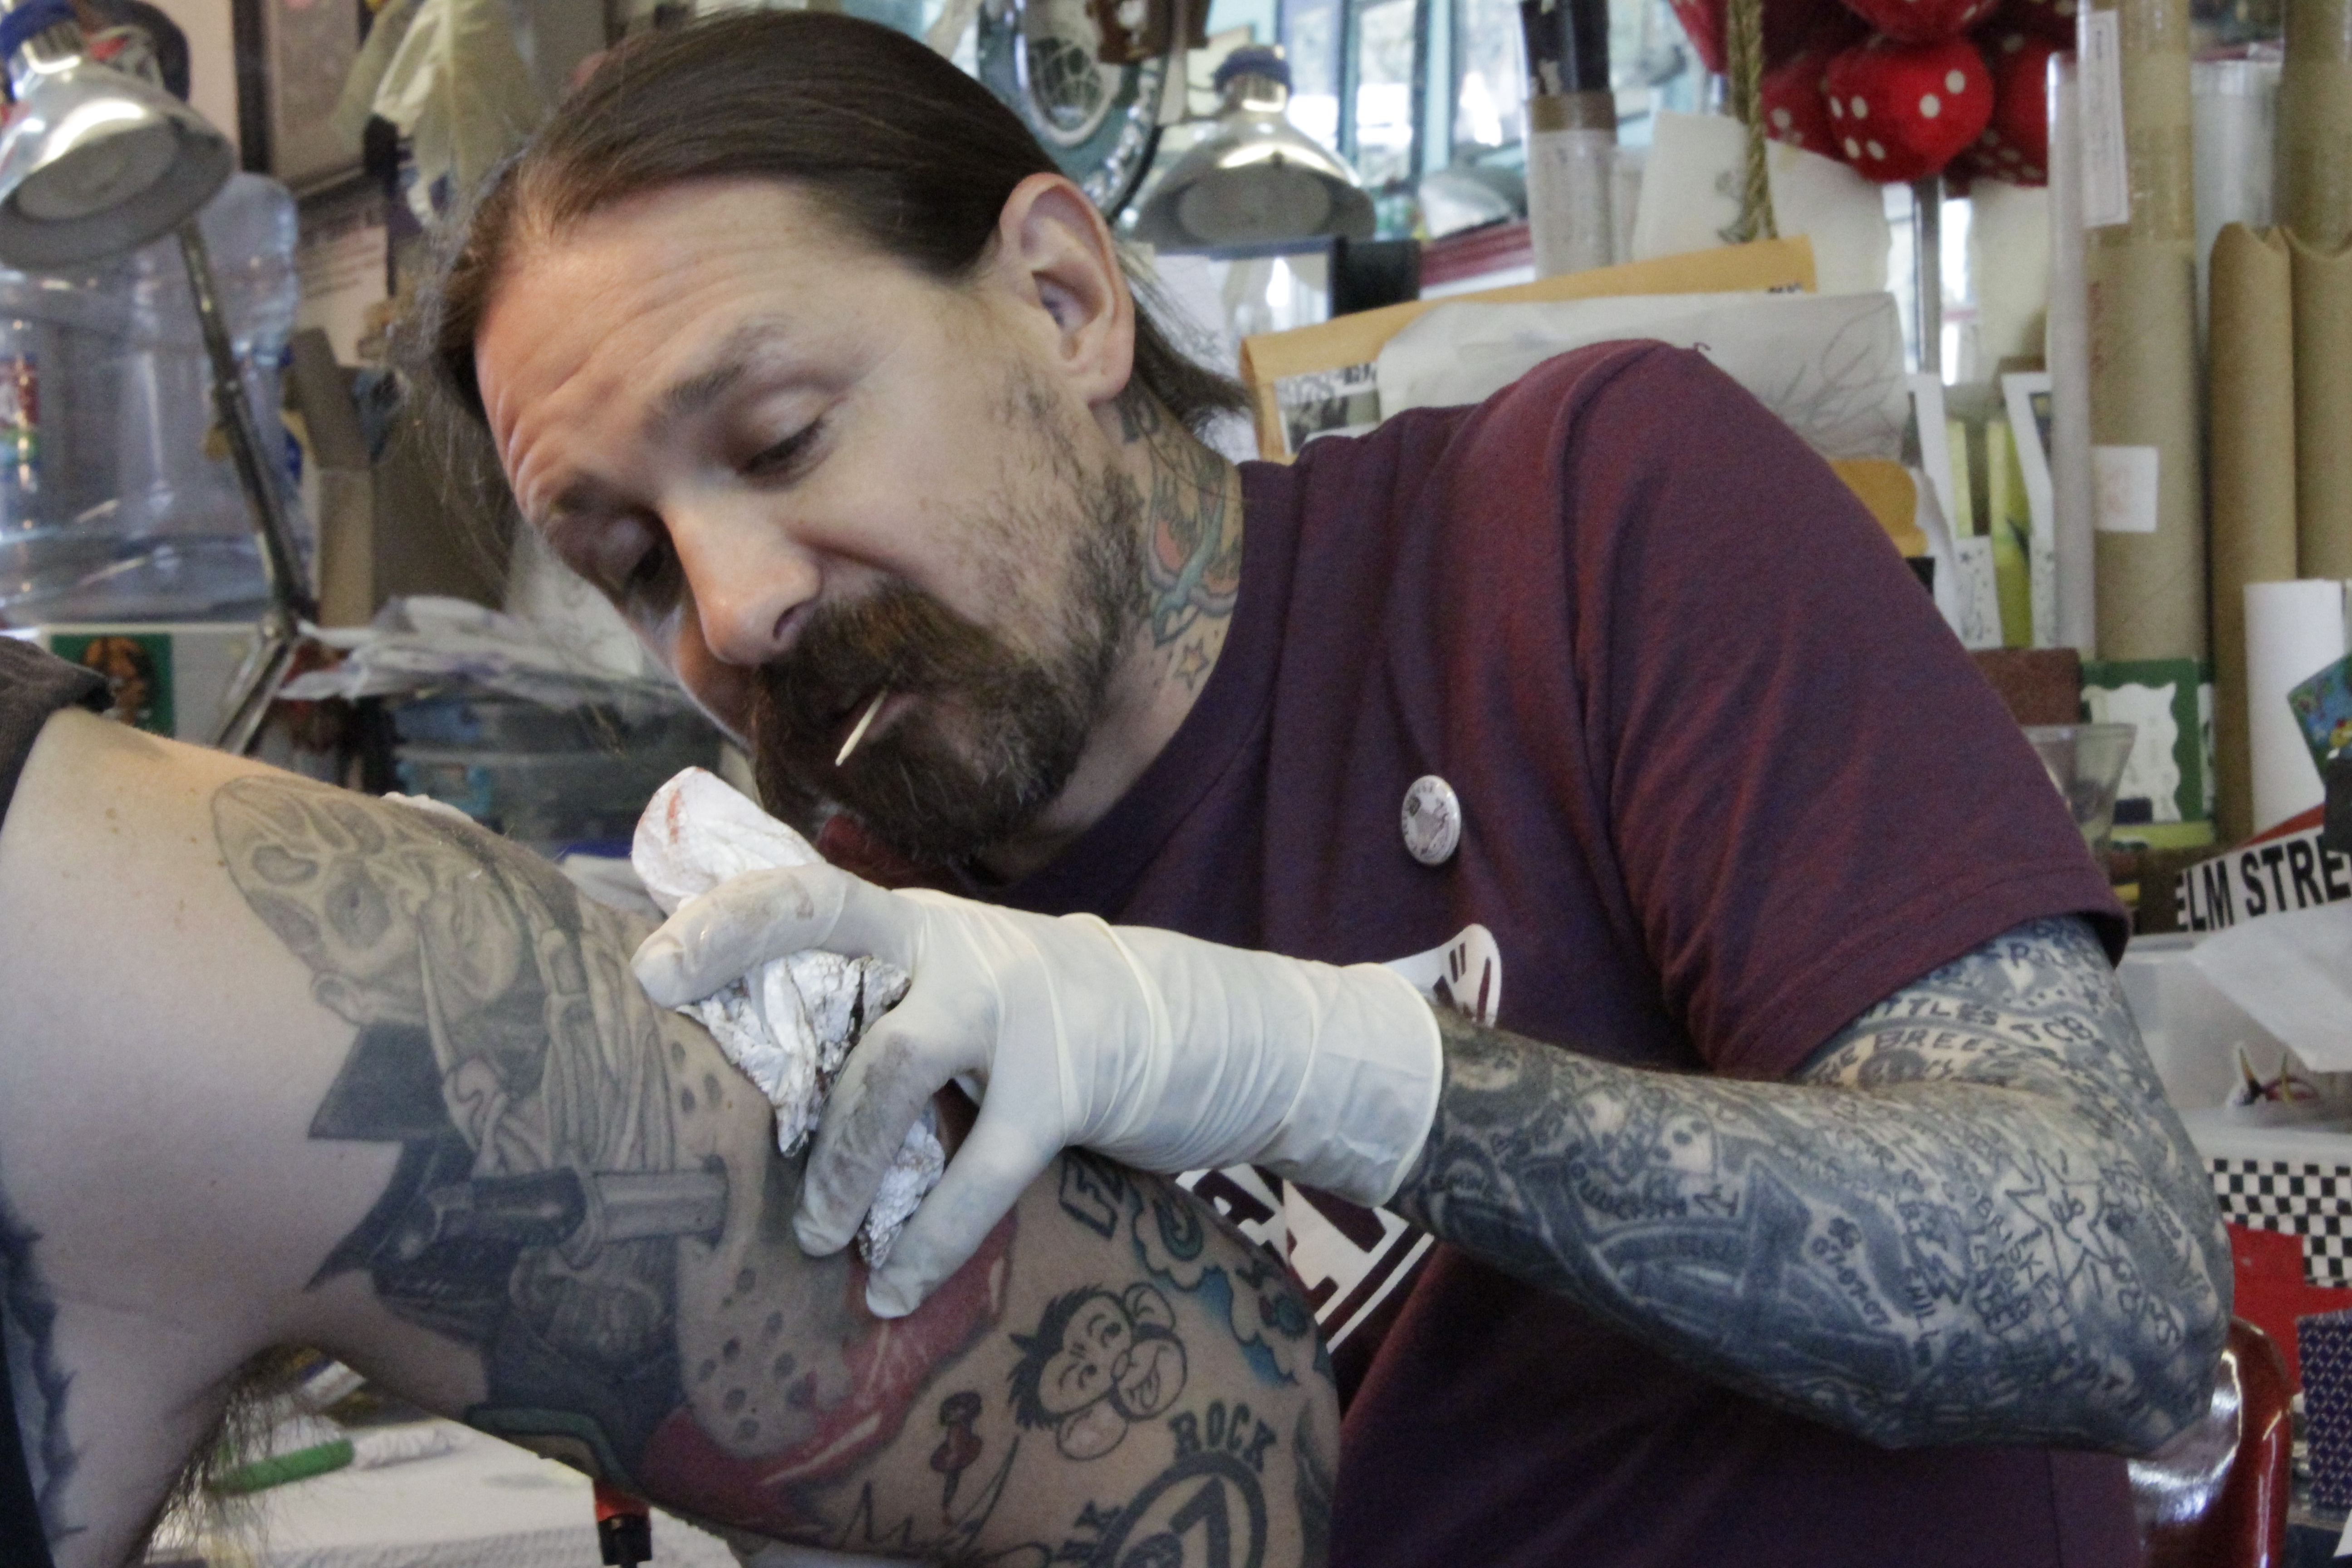 Tattoo History: Friday the 13th and Oliver Peck - Tattoo.com